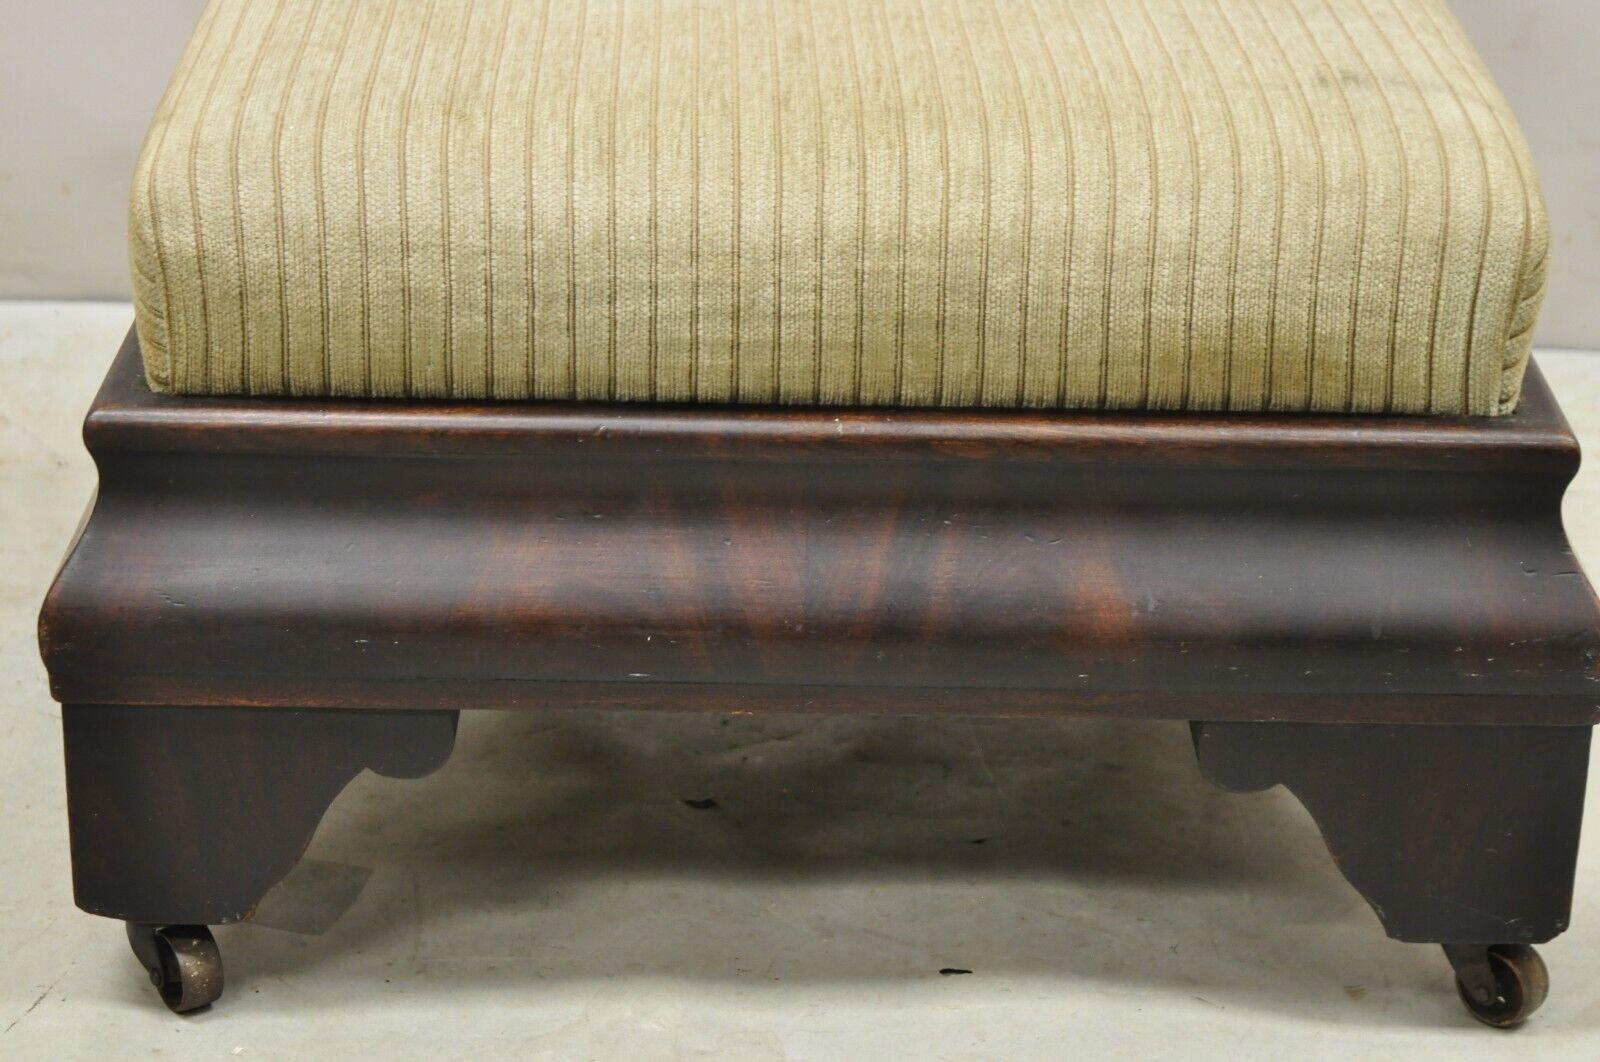 Antique American Empire Flame Mahogany Upholstered Ottoman Footstool on Wheels 7